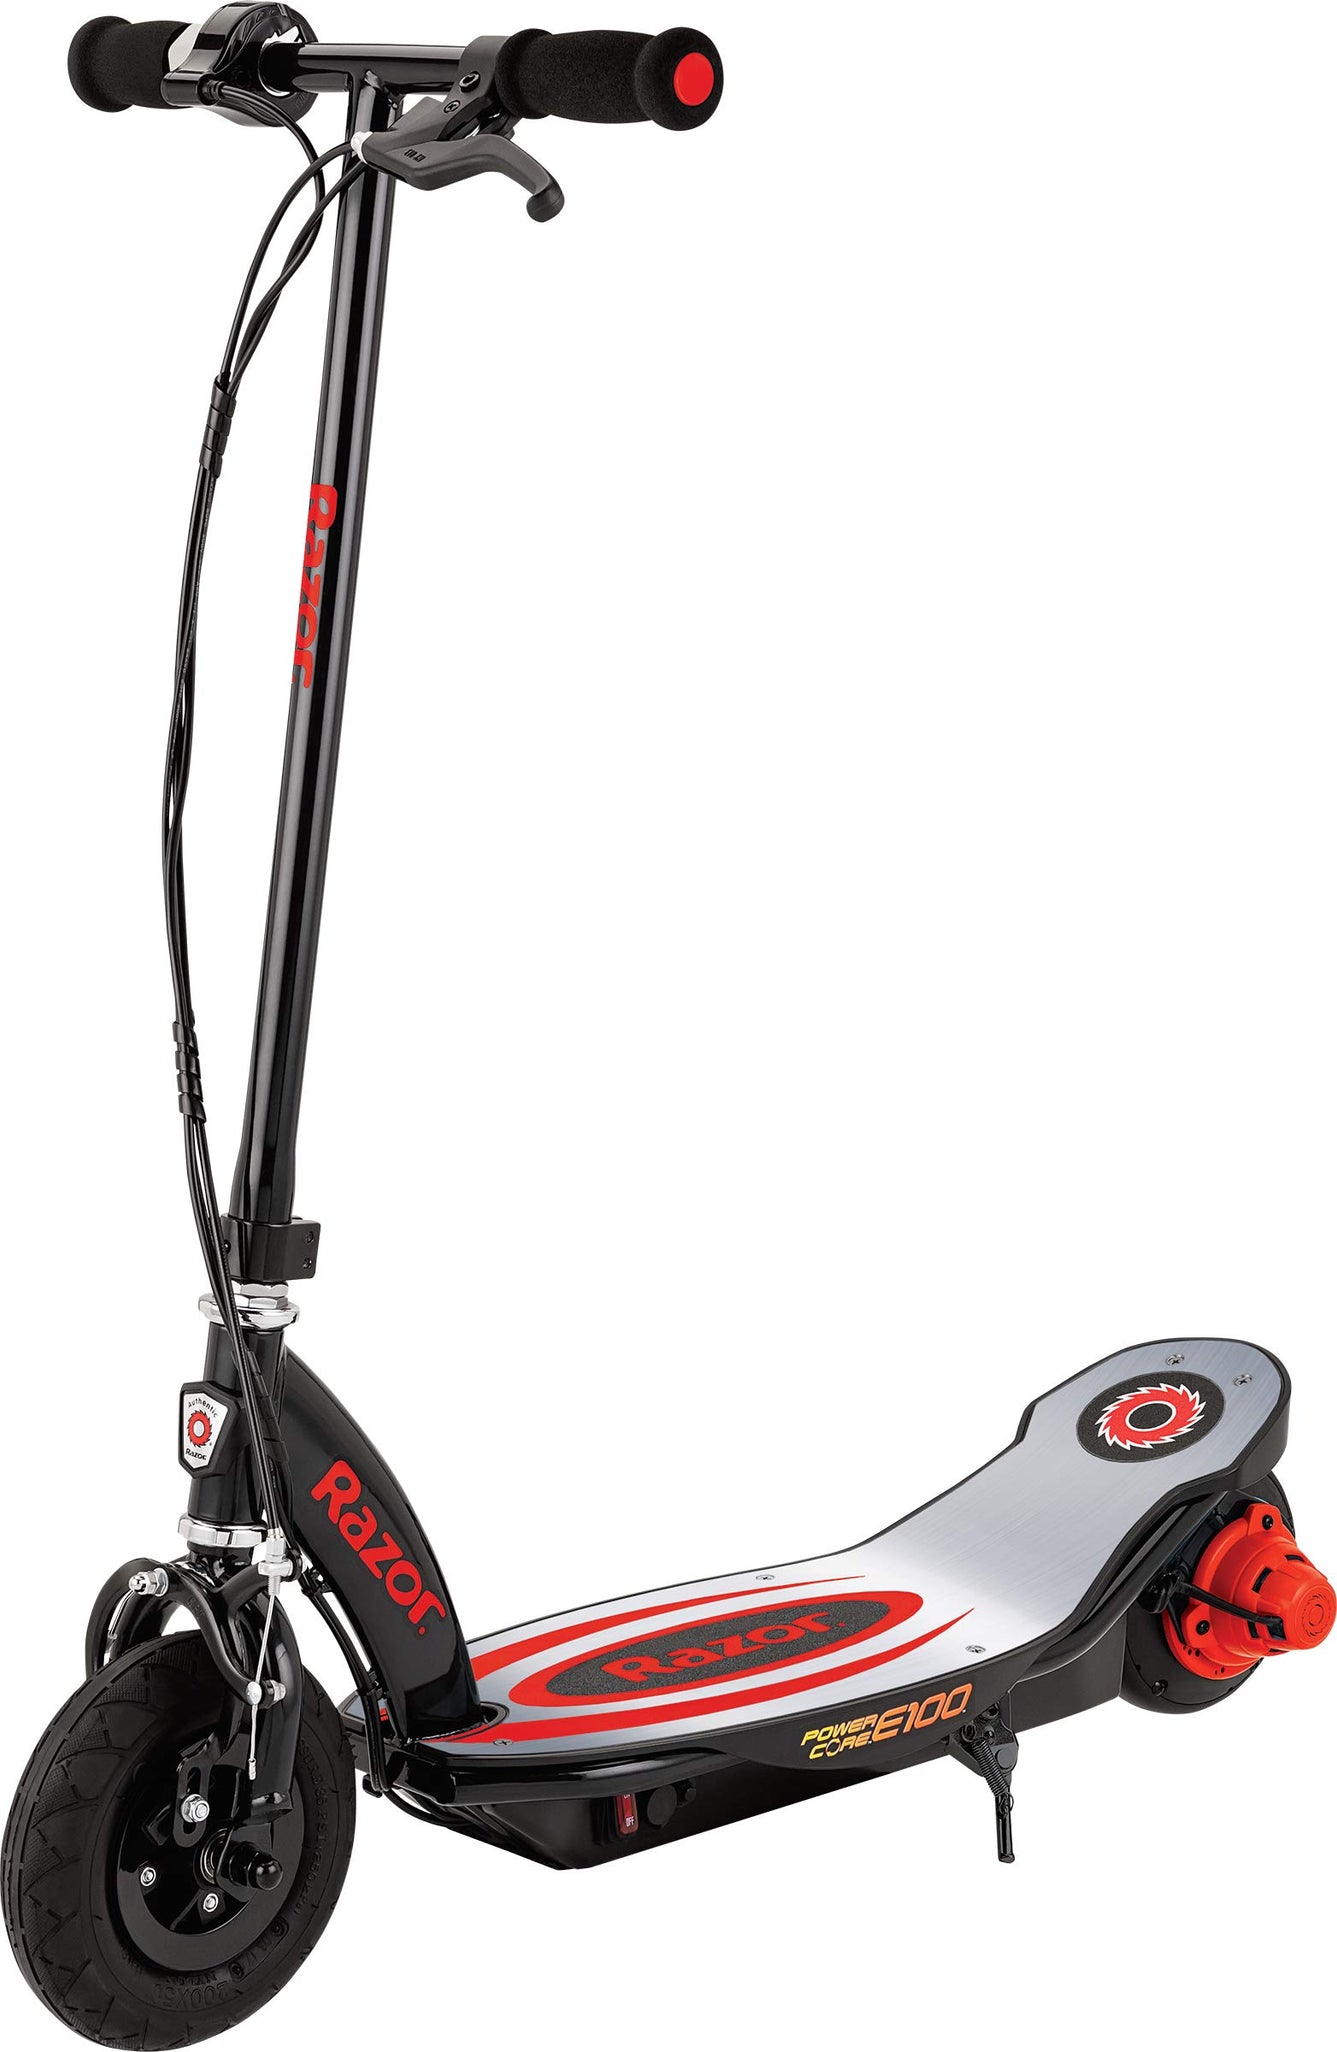 Razor Power Core E100 Electric Scooter - 100w Hub Motor, 8" Air-filled Tire, Up to 11 mph and 60 min Ride Time, for Kids Ages 8+